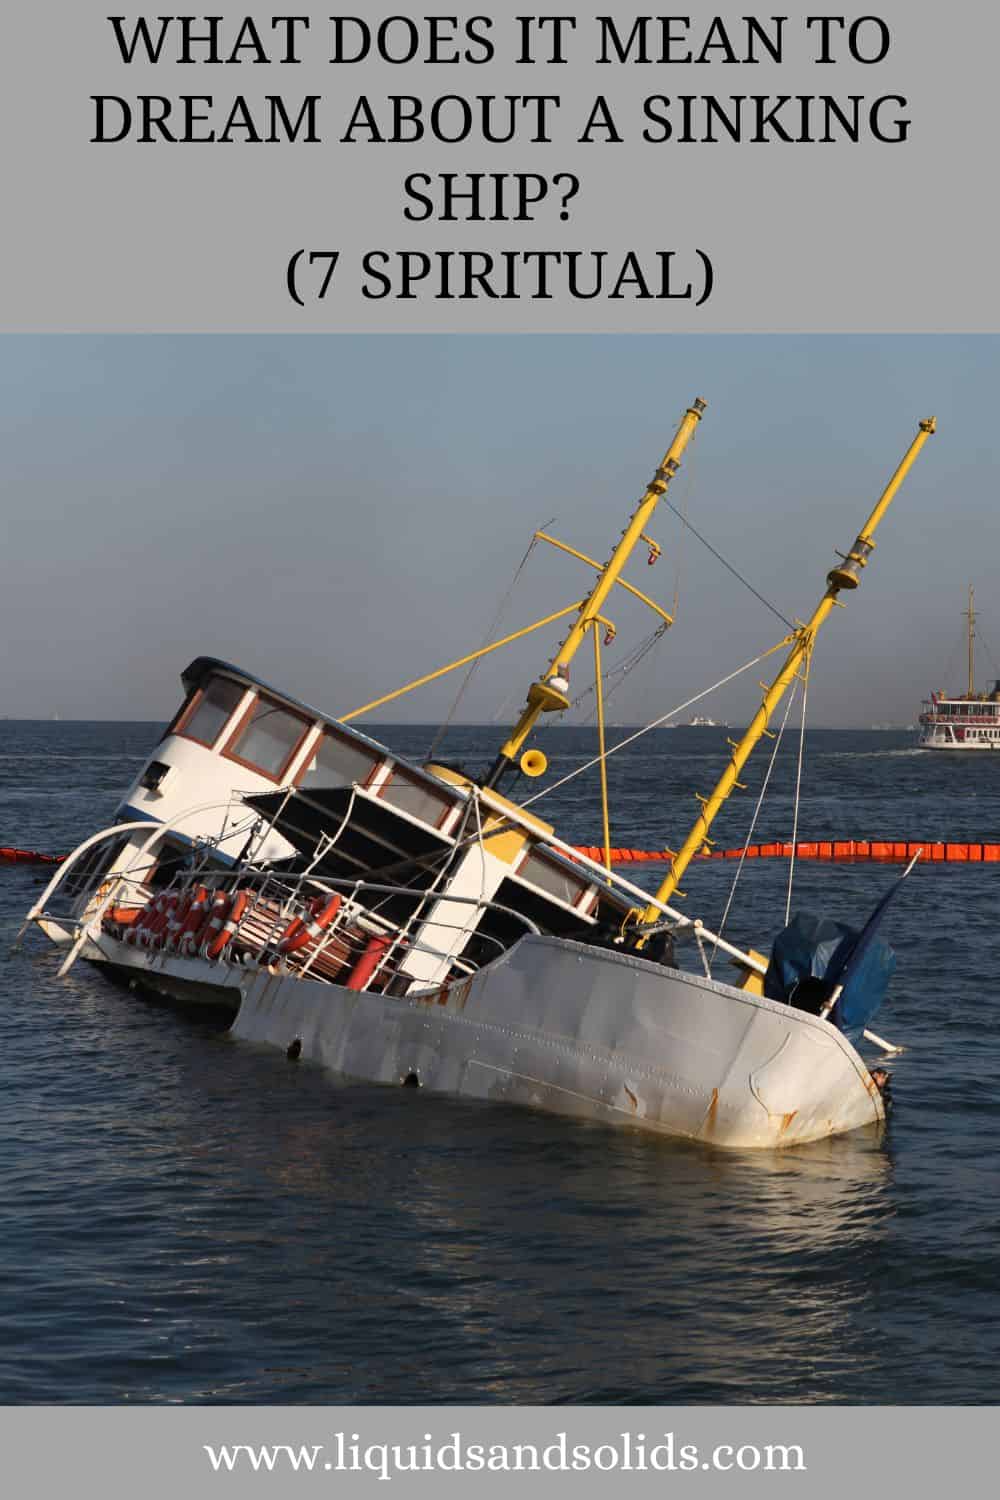 What Does It Mean To Dream About A Sinking Ship? (7 Spiritual)